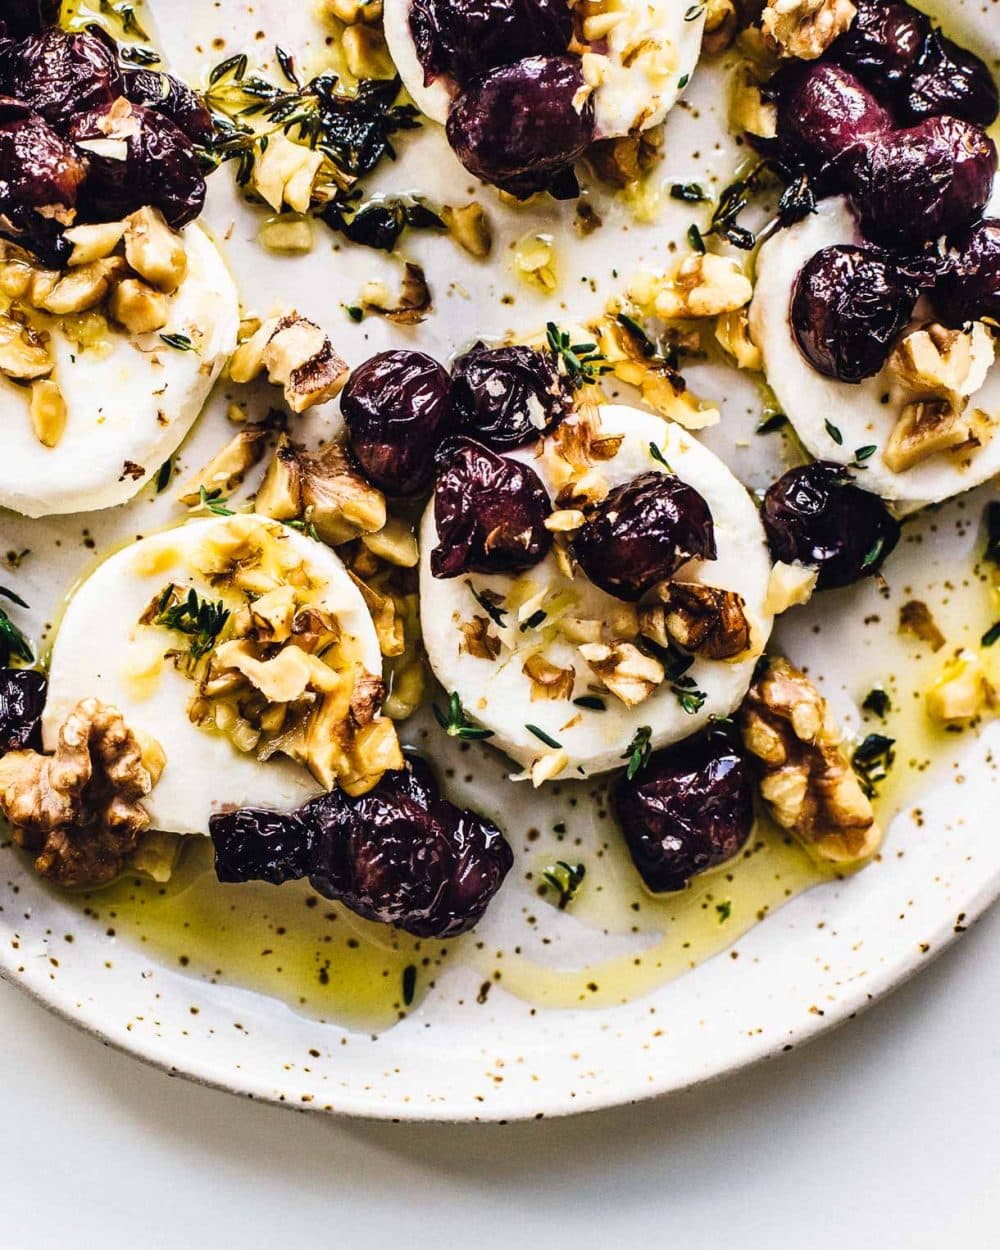 marinated goat cheese served with roasted grapes and walnuts